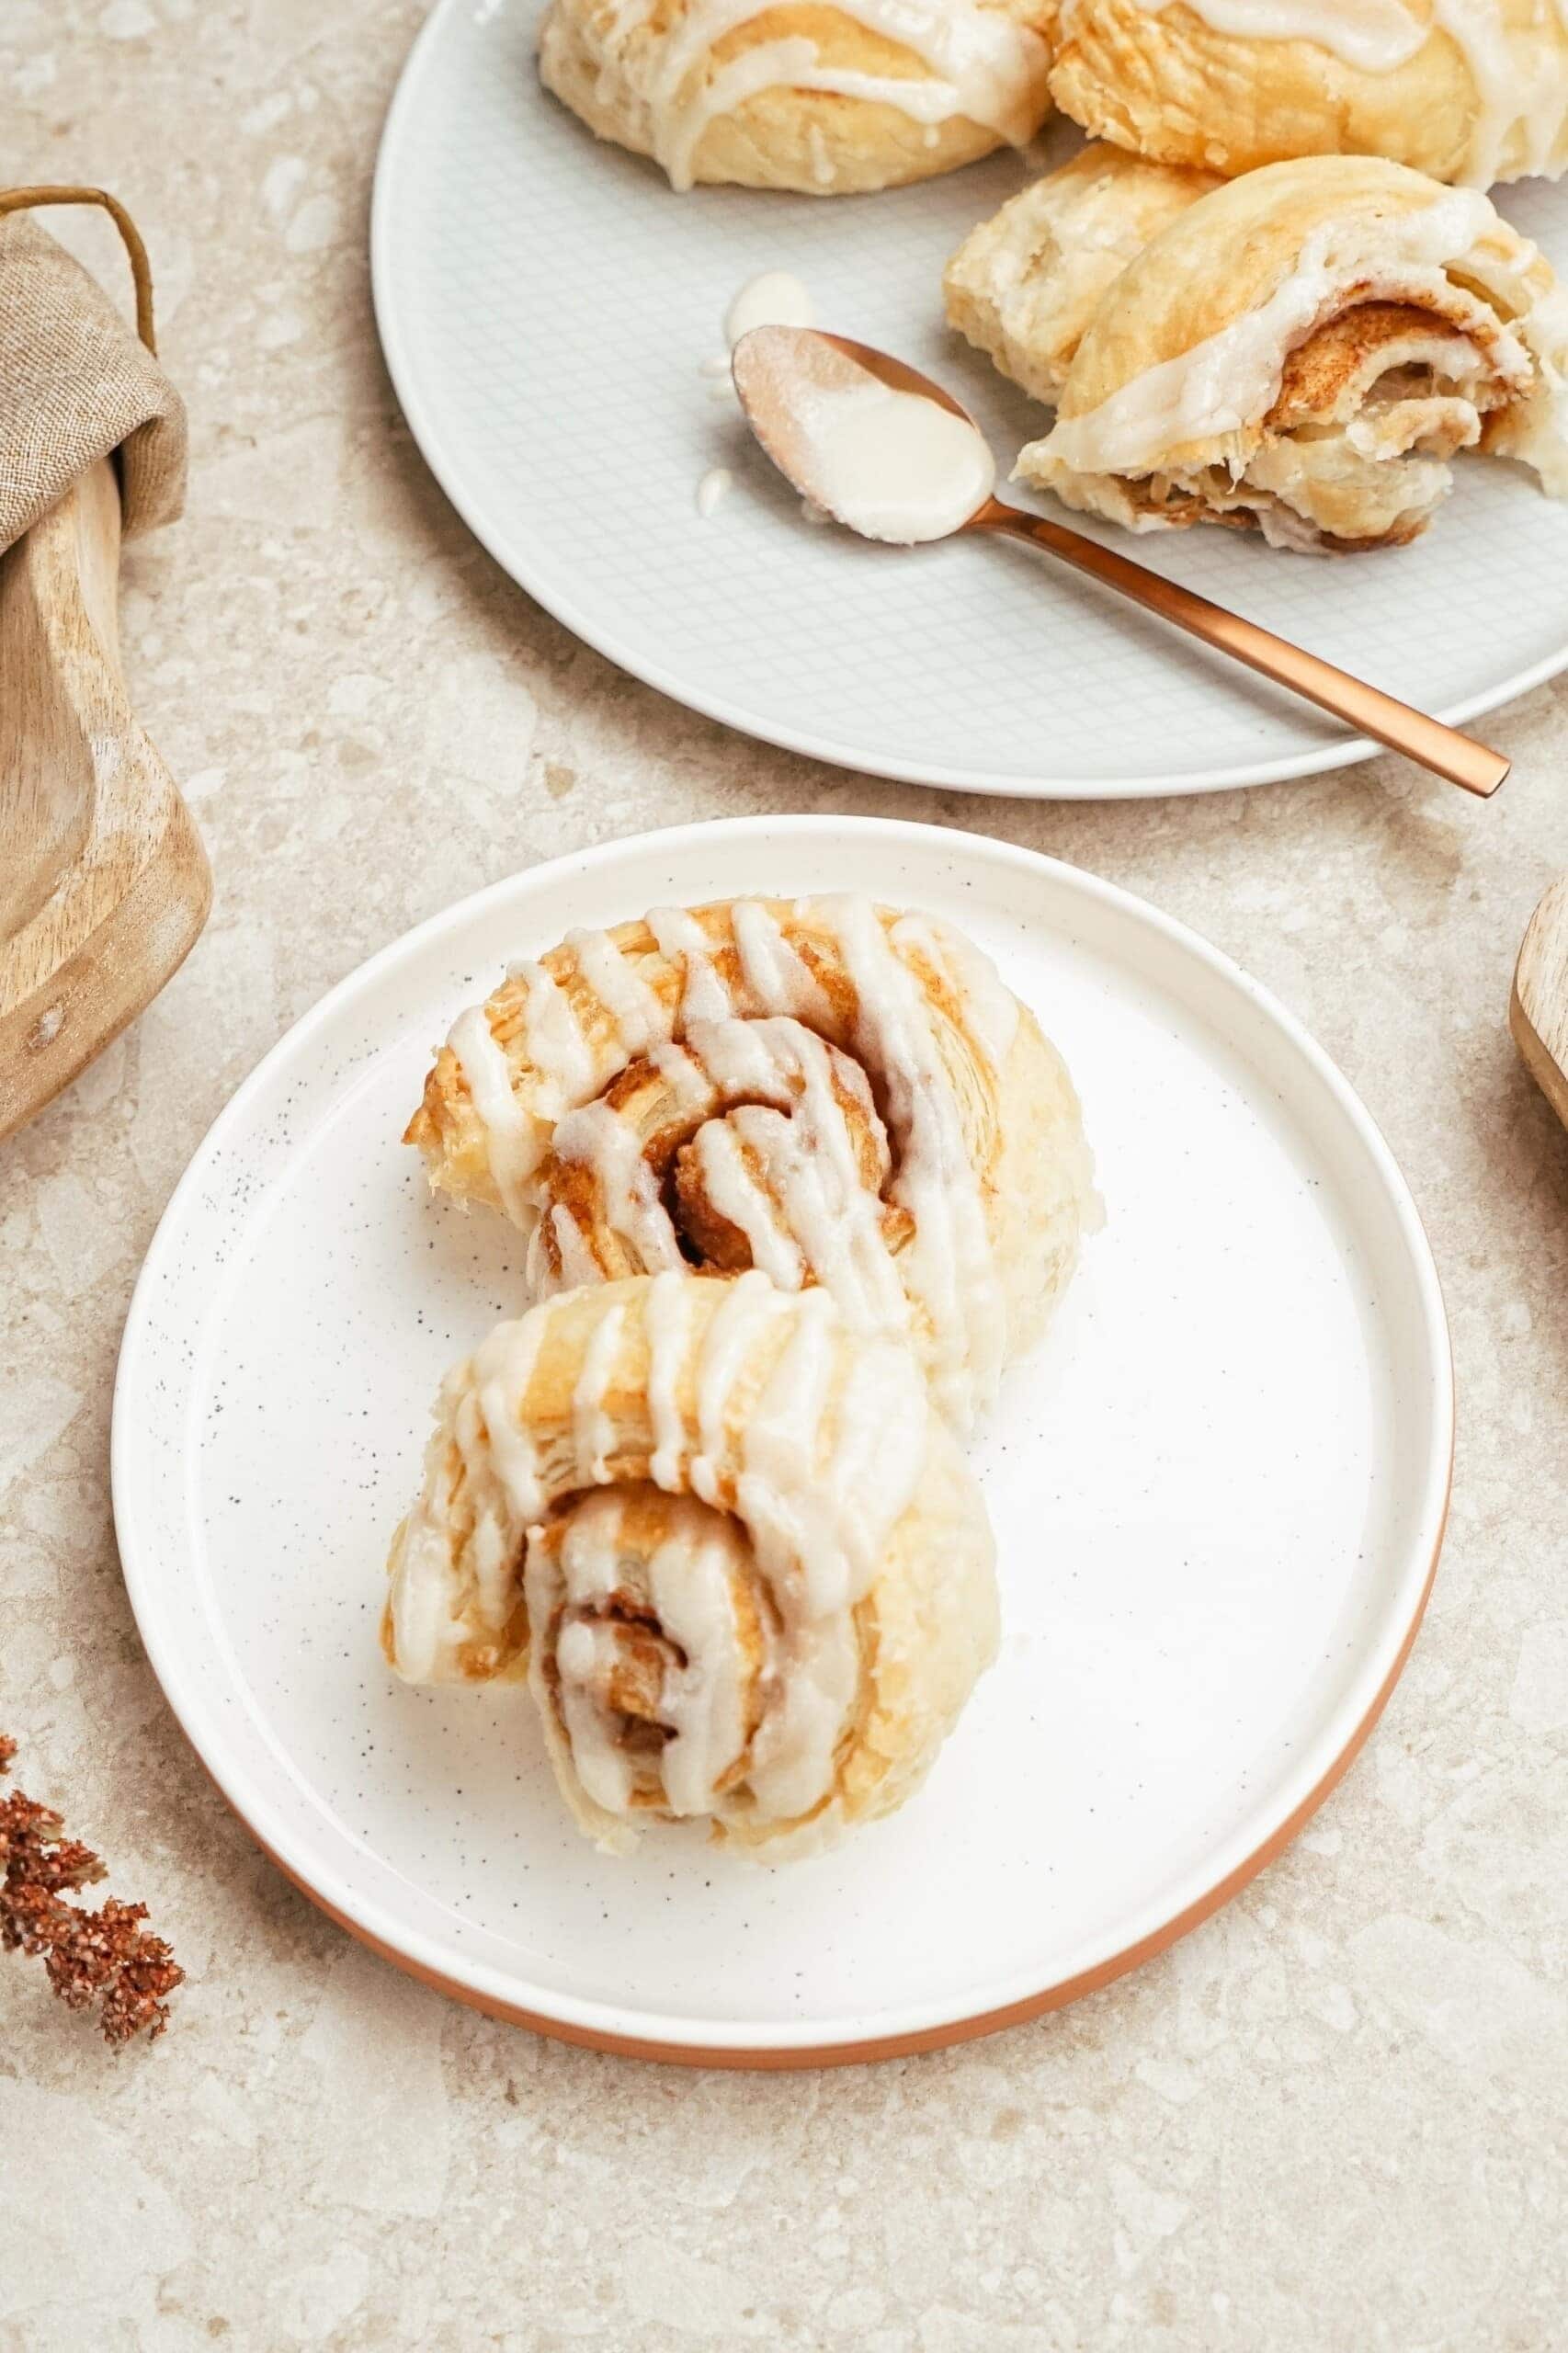 Cinnamon rolls with sugar glazed toppings served on plates. 